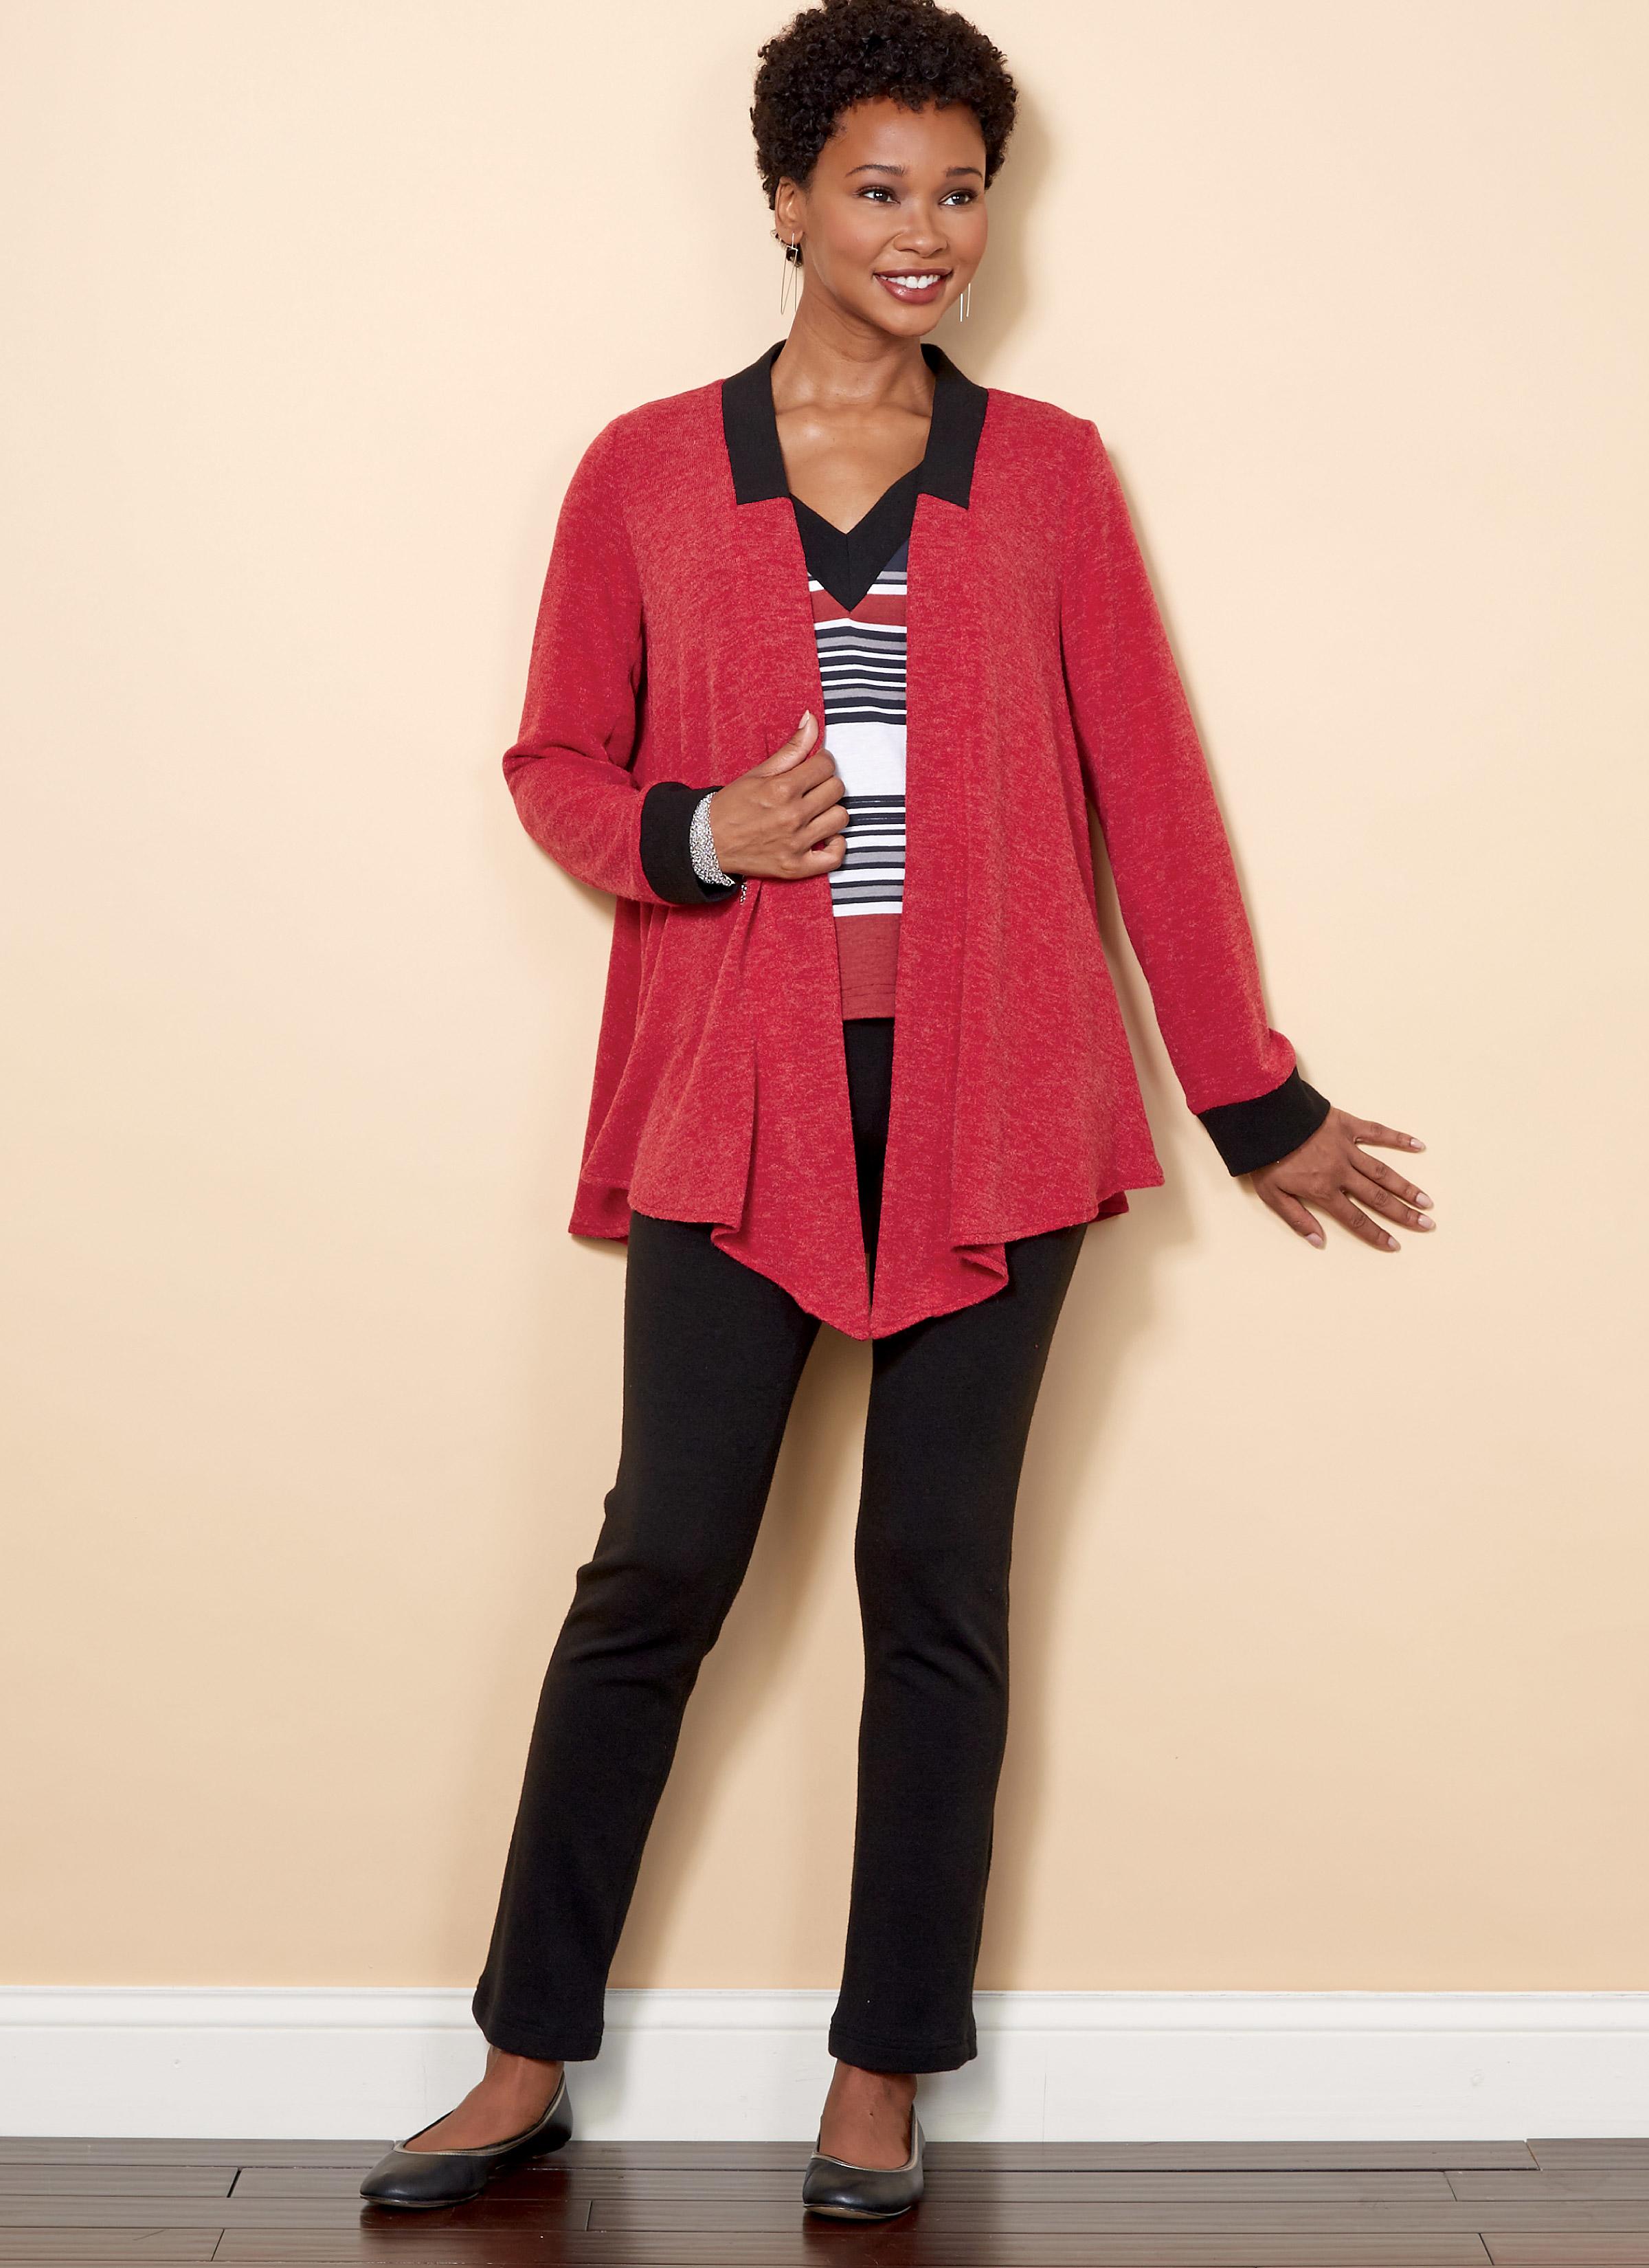 Butterick B6528 Misses' Knit Jacket, Top, Shorts and Pants